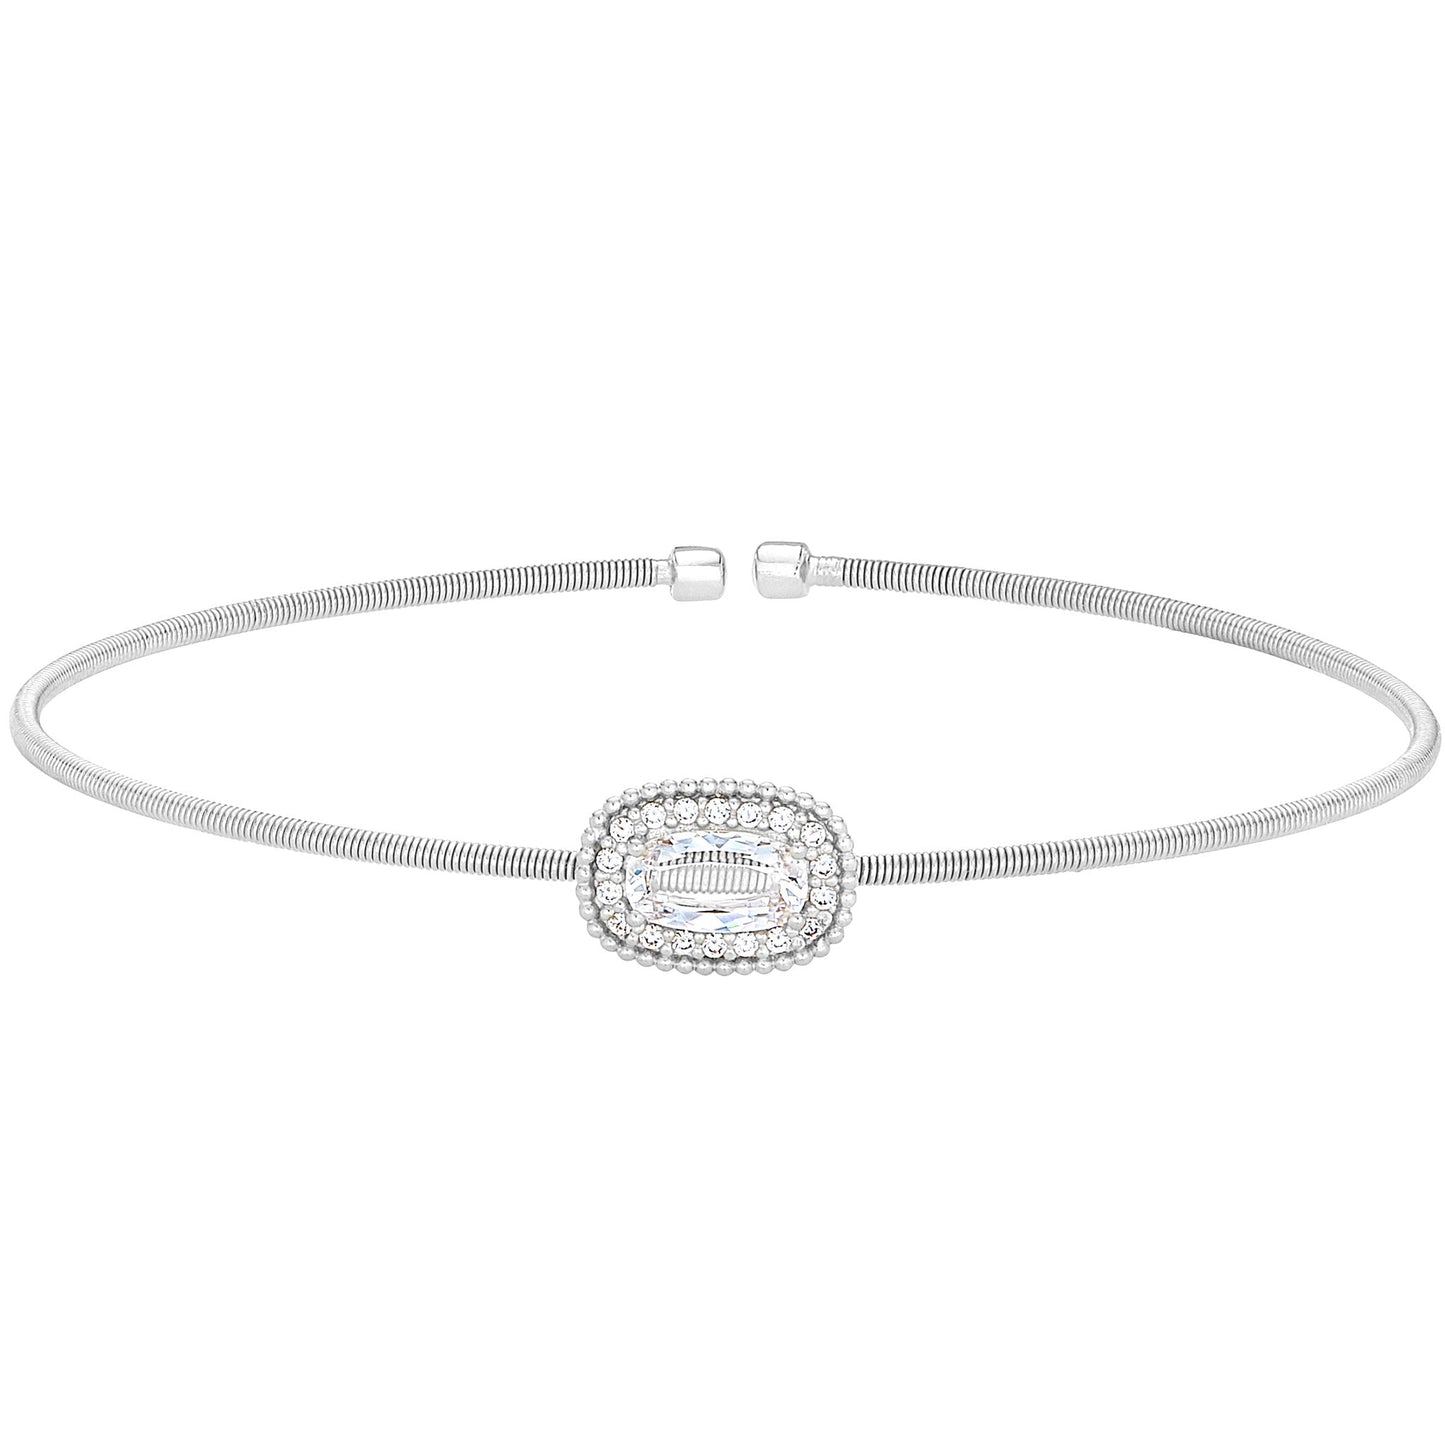 A oval halo design simulated diamonds flexible cable bracelet displayed on a neutral white background.